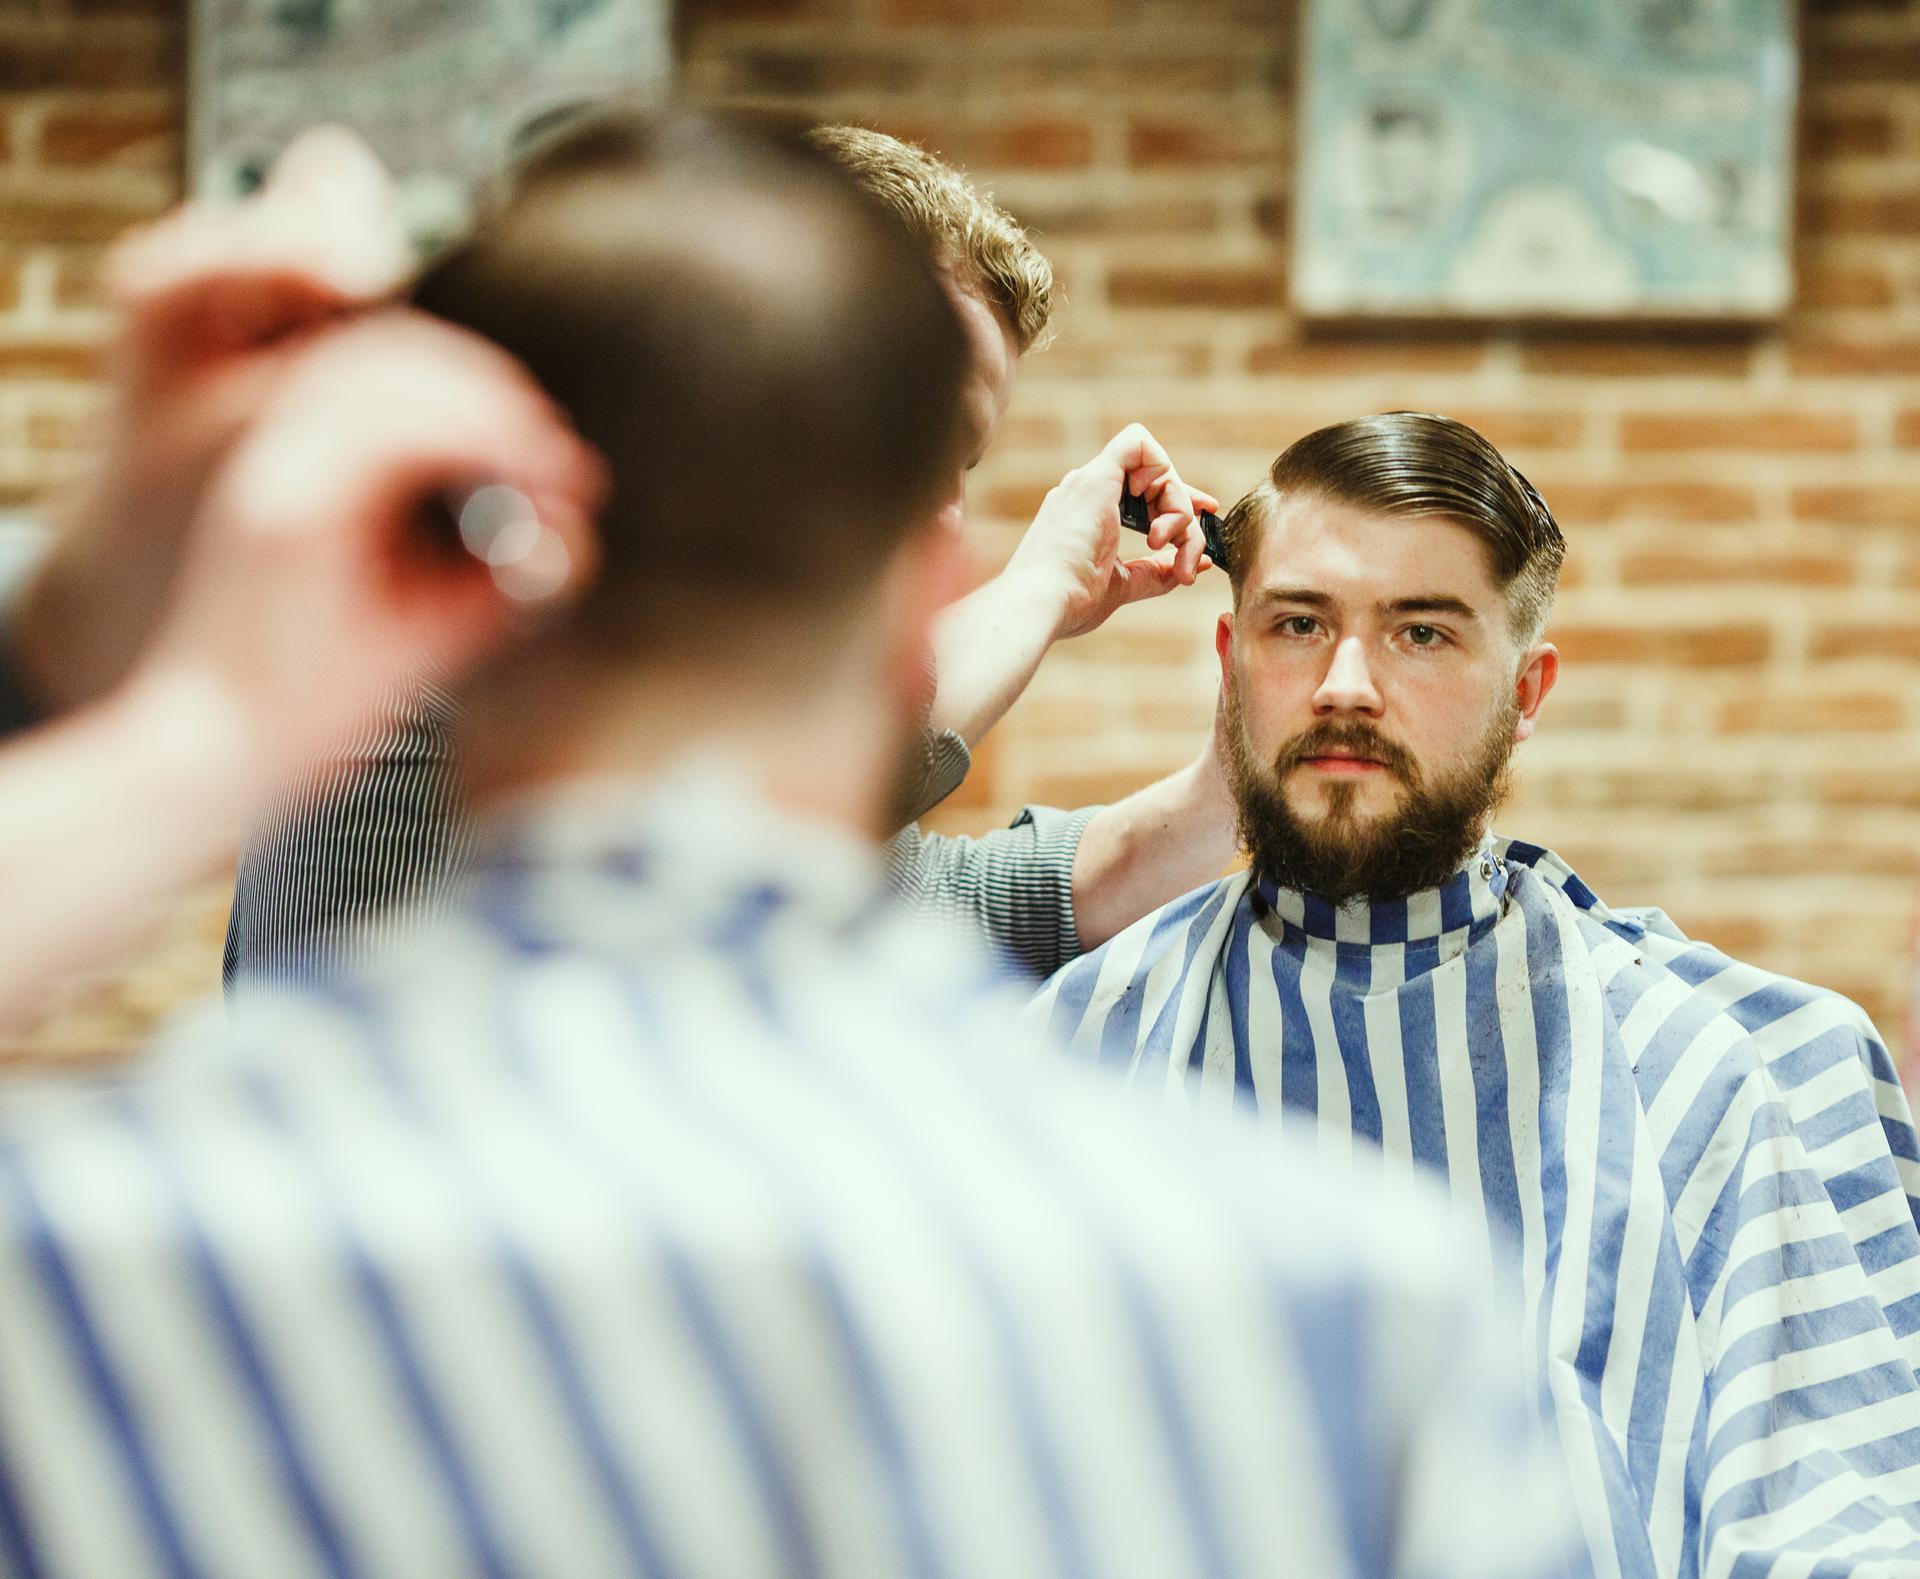 M&B Barbers - Barber Shop Near Me in Crystal Palace